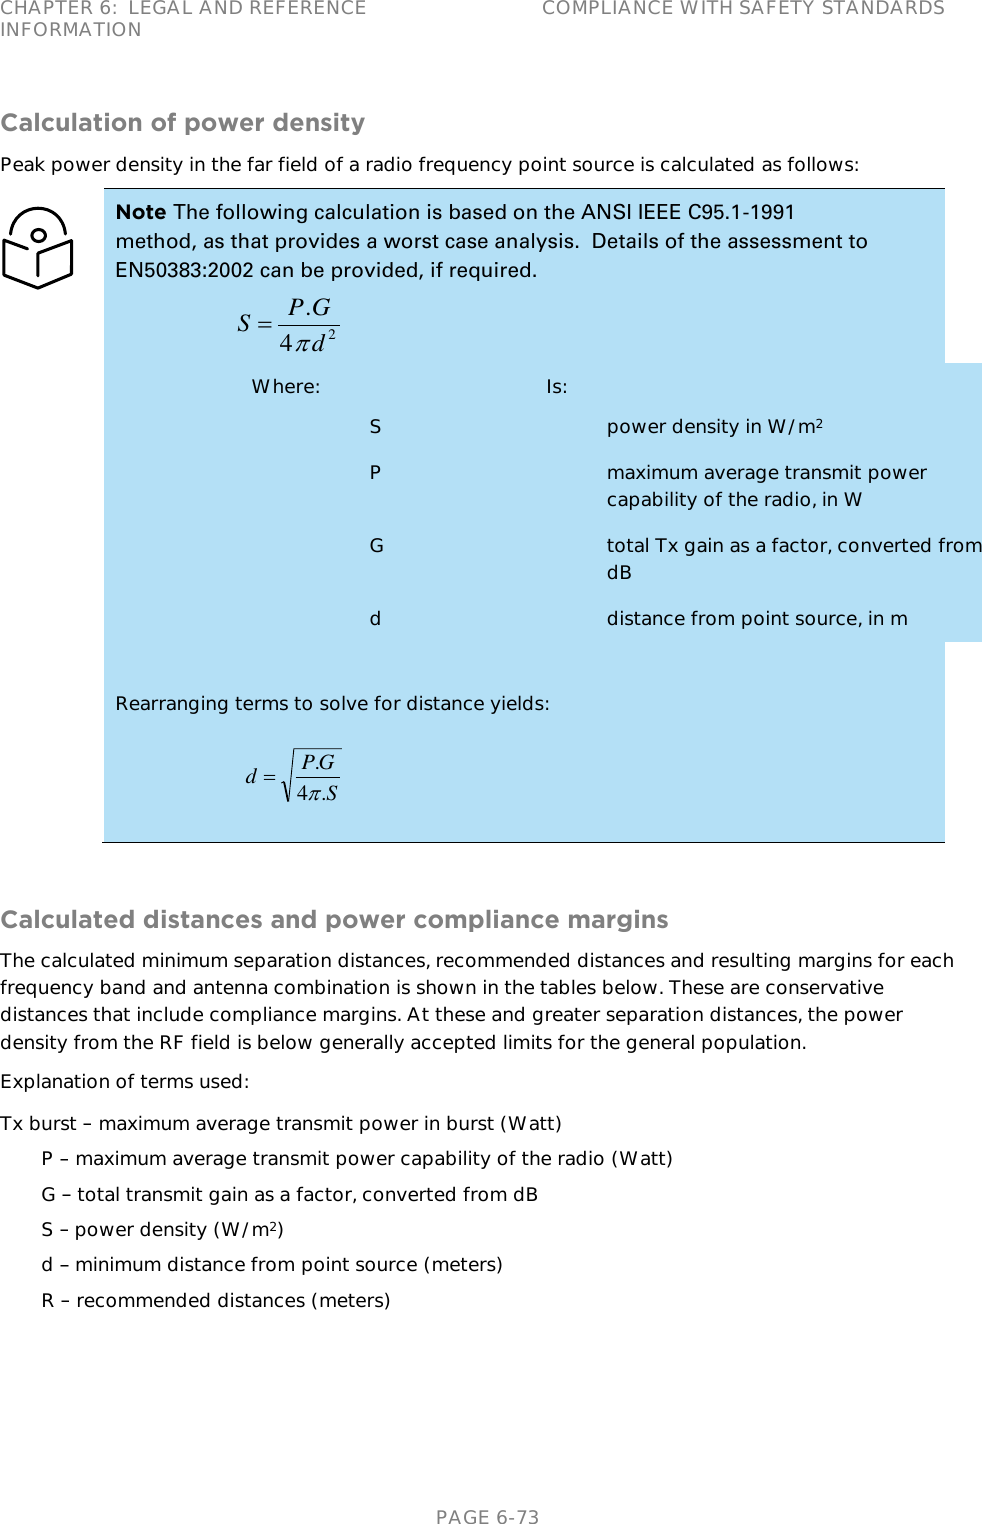 CHAPTER 6:  LEGAL AND REFERENCE INFORMATION COMPLIANCE WITH SAFETY STANDARDS   PAGE 6-73 Calculation of power density Peak power density in the far field of a radio frequency point source is calculated as follows:  Note The following calculation is based on the ANSI IEEE C95.1-1991 method, as that provides a worst case analysis.  Details of the assessment to EN50383:2002 can be provided, if required.    Where:  Is:   S  power density in W/m2  P  maximum average transmit power capability of the radio, in W  G  total Tx gain as a factor, converted from dB  d  distance from point source, in m  Rearranging terms to solve for distance yields:     Calculated distances and power compliance margins The calculated minimum separation distances, recommended distances and resulting margins for each frequency band and antenna combination is shown in the tables below. These are conservative distances that include compliance margins. At these and greater separation distances, the power density from the RF field is below generally accepted limits for the general population. Explanation of terms used: Tx burst   maximum average transmit power in burst (Watt) P   maximum average transmit power capability of the radio (Watt) G   total transmit gain as a factor, converted from dB S   power density (W/m2) d   minimum distance from point source (meters) R   recommended distances (meters)    24.dGPSSGPd.4.